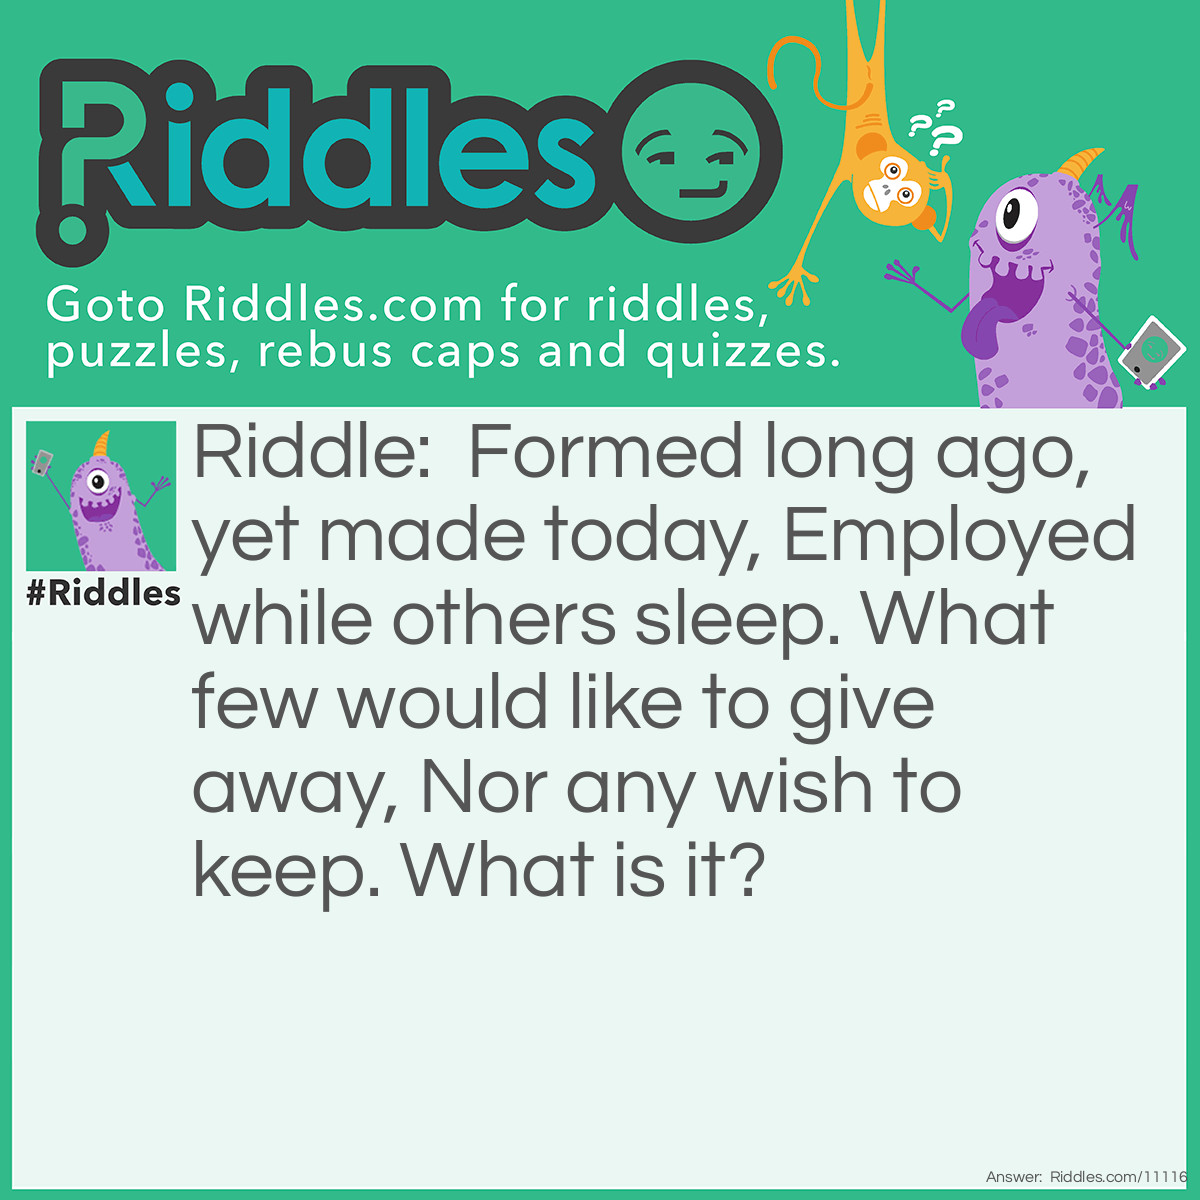 Riddle: Formed long ago, yet made today, Employed while others sleep. What few would like to give away, Nor any wish to keep. What is it? Answer: A bed.